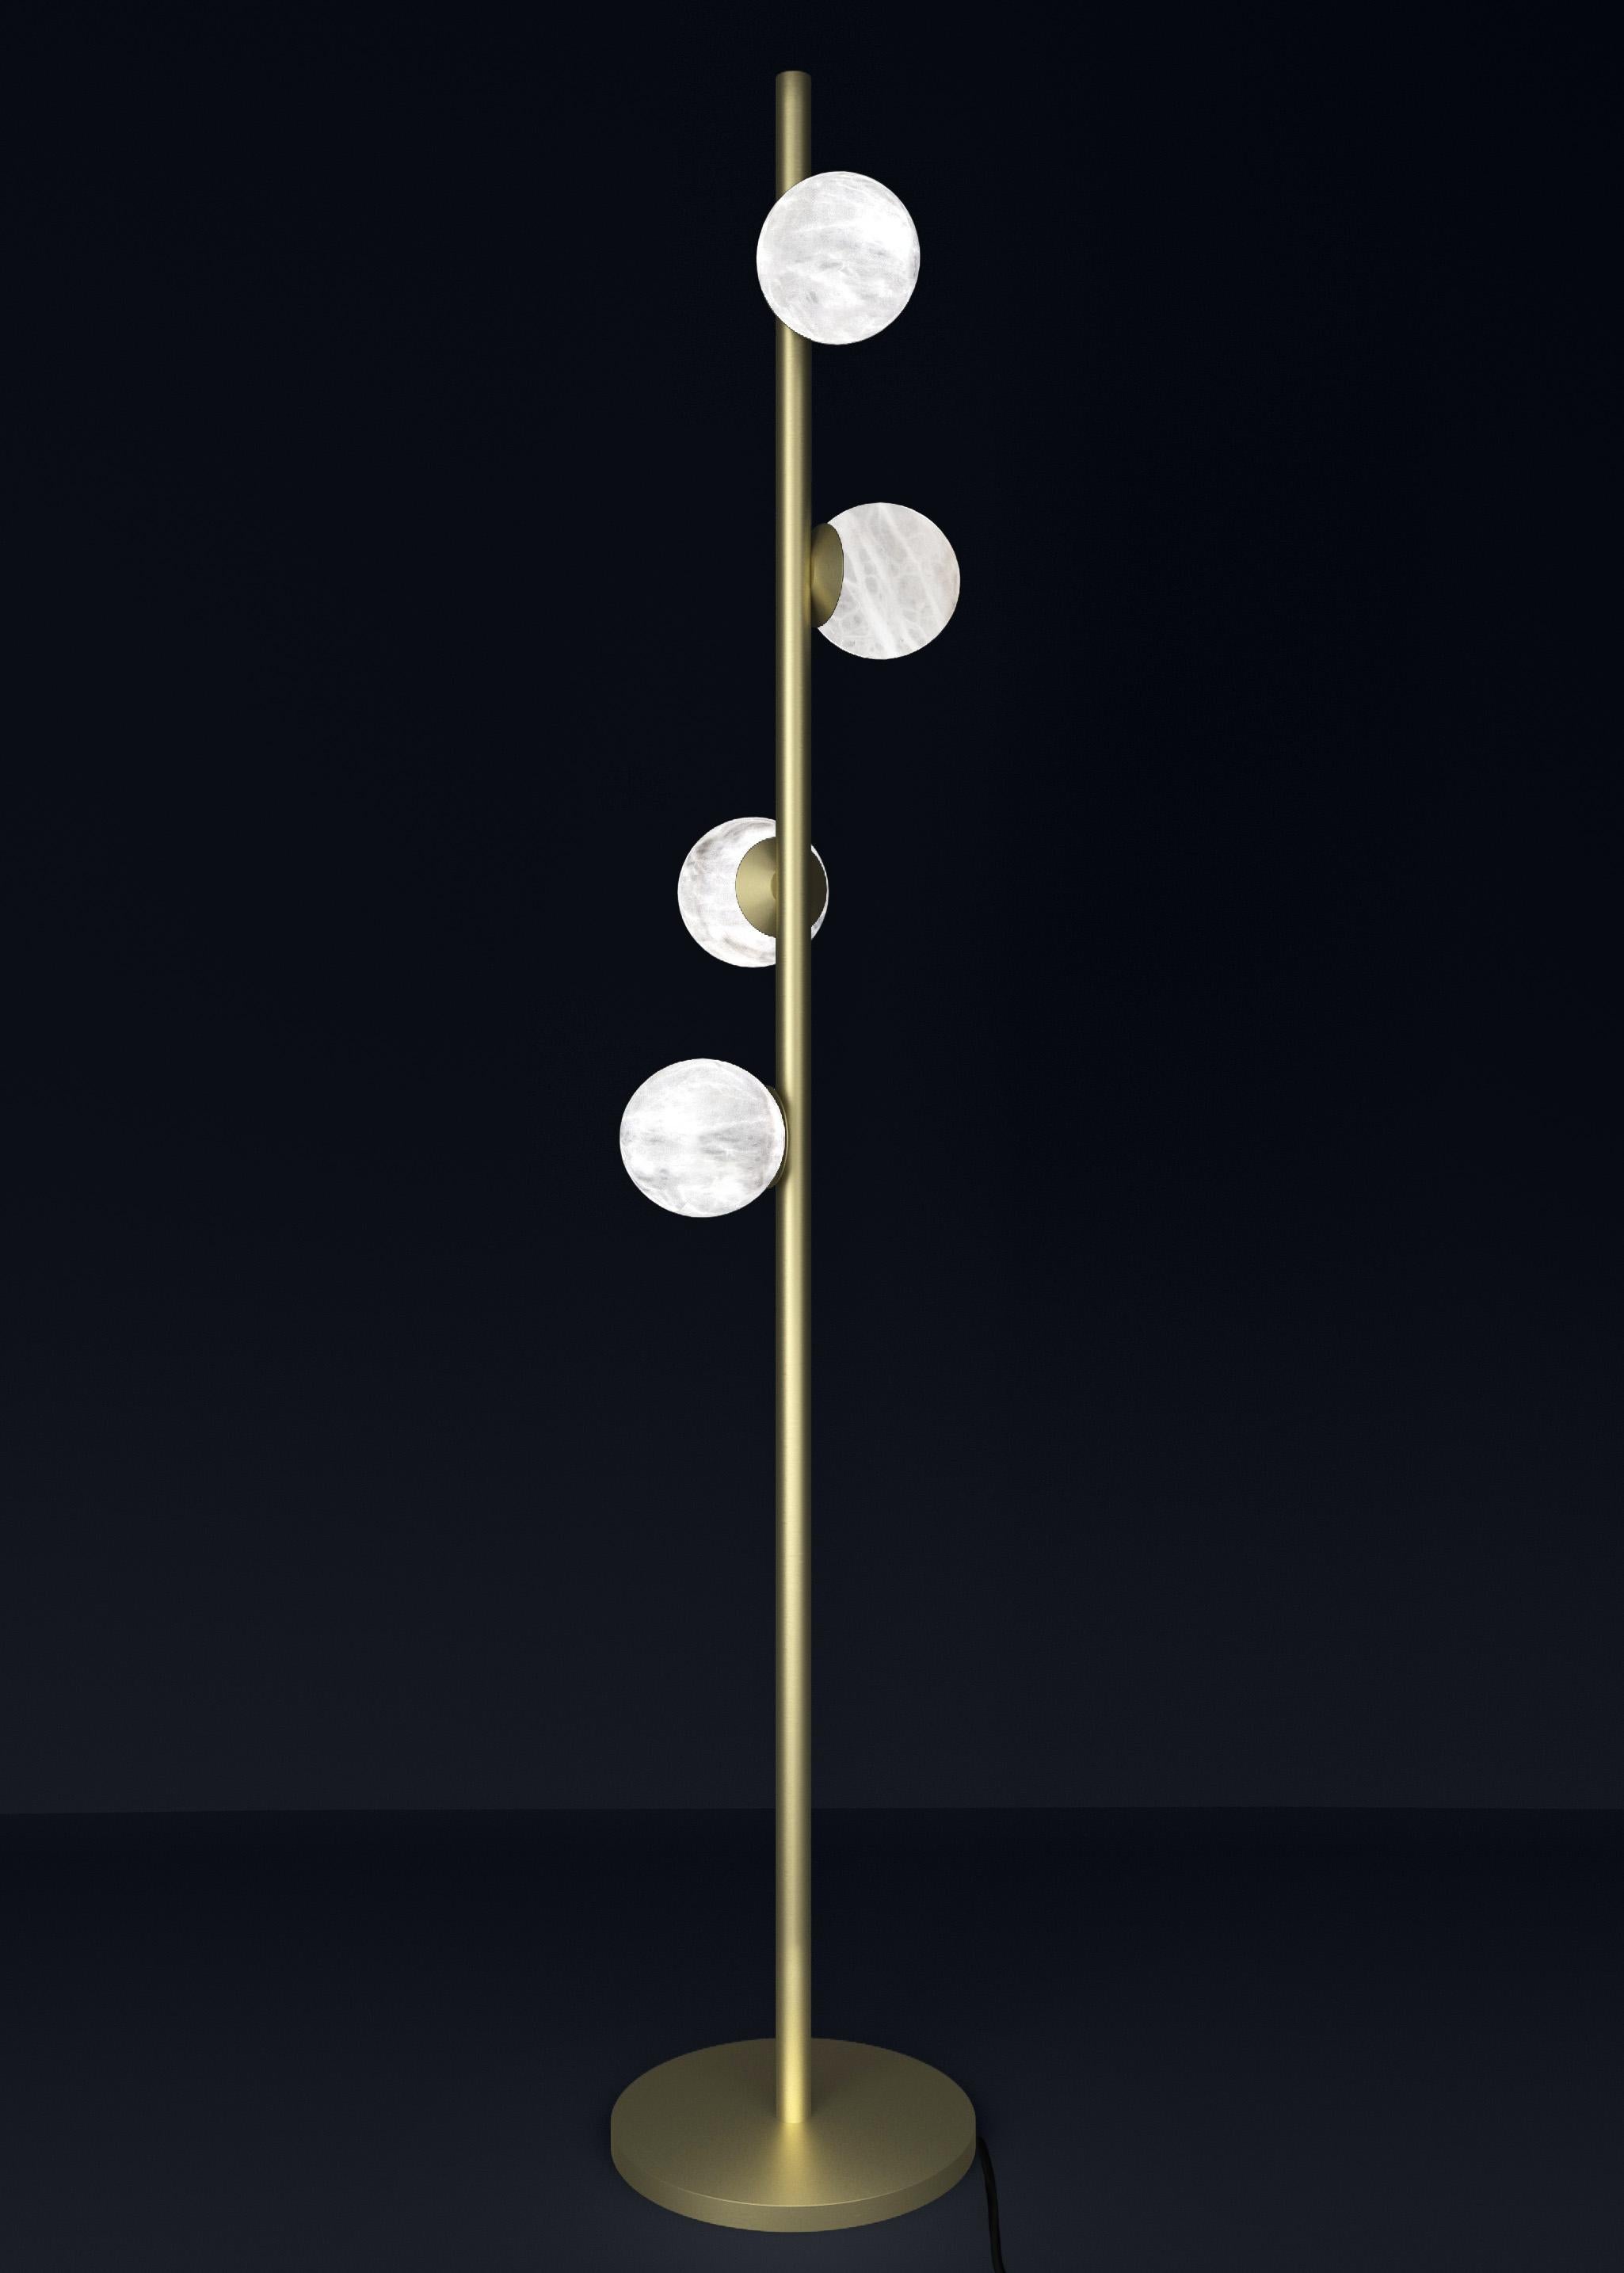 Ofione Brushed Brass Floor Lamp by Alabastro Italiano
Dimensions: D 50 x W 50 x H 170 cm.
Materials: White alabaster and brass.

Available in different finishes: Shiny Silver, Bronze, Brushed Brass, Matte Black, Ruggine of Florence, Brushed